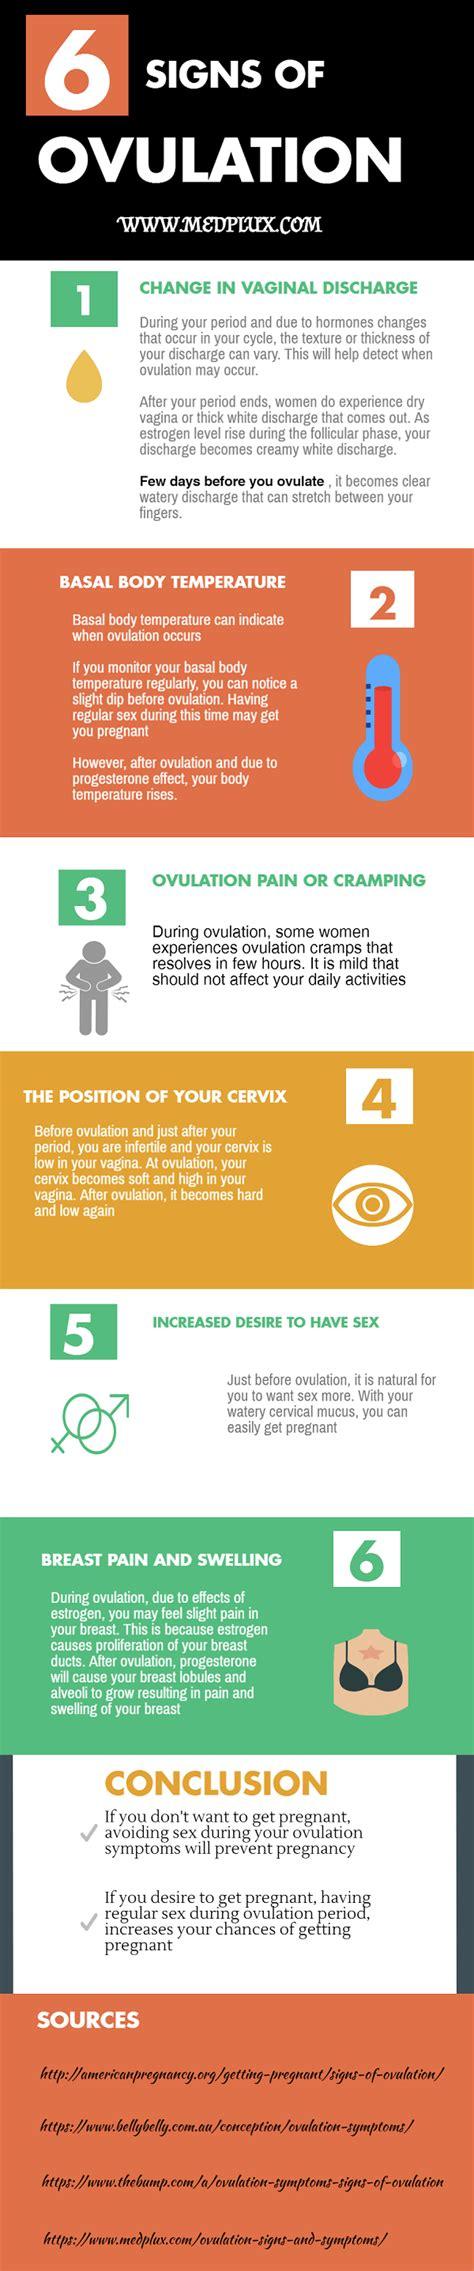 Signs and Symptoms of Ovulation Every Woman Should Know